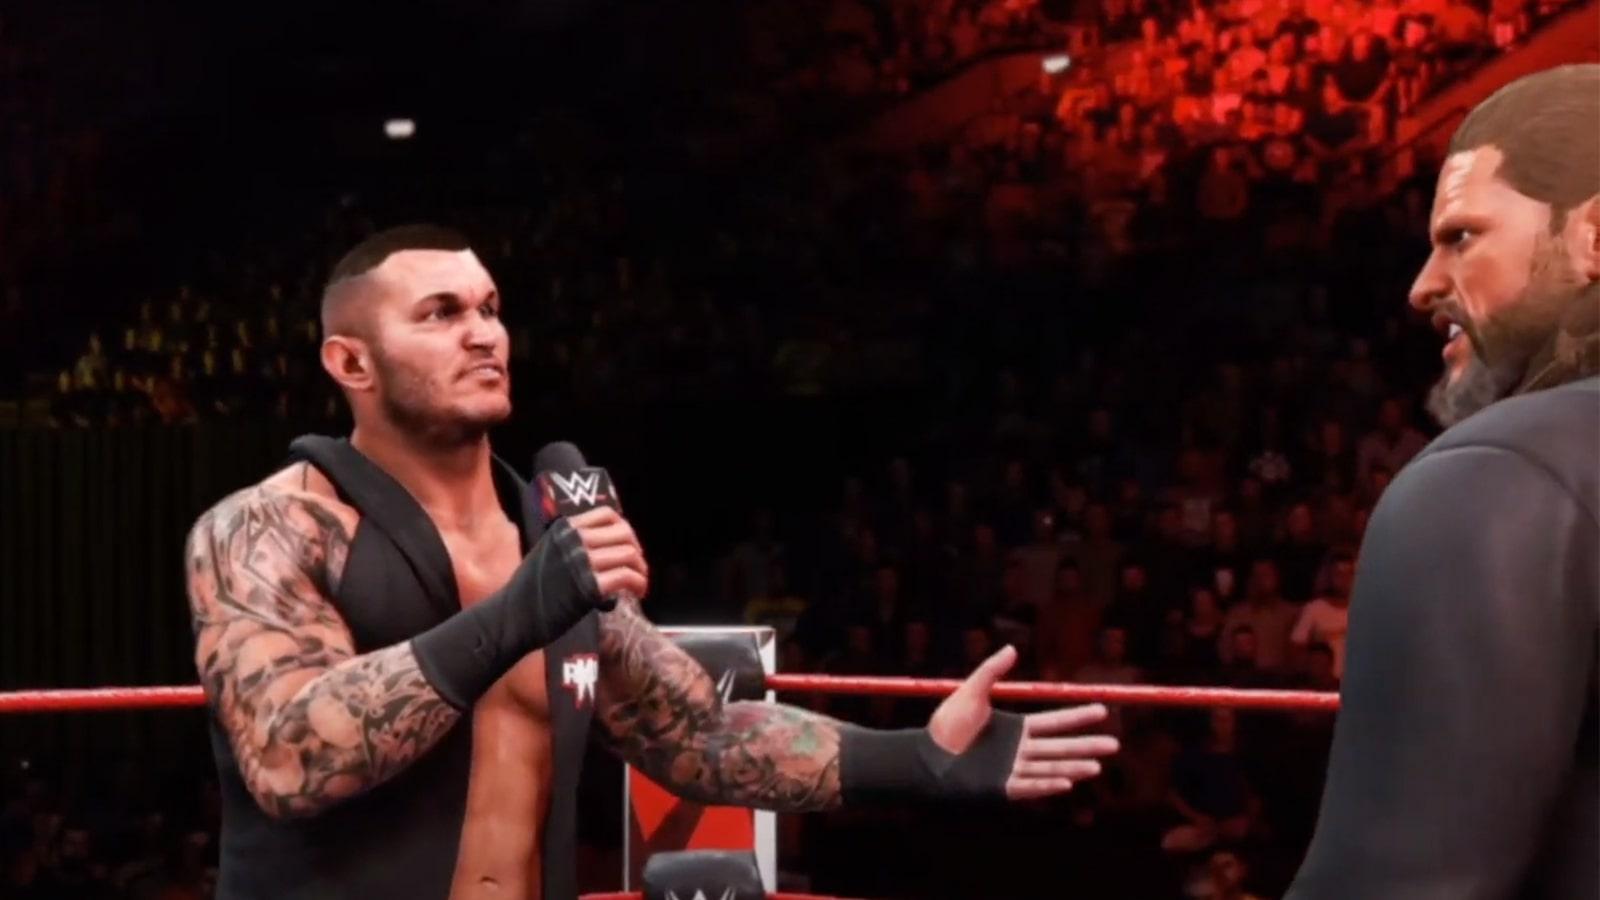 Everything you need to know about WWE 2K22: price, release date, pre-order  details & roster revealed - Smartprix